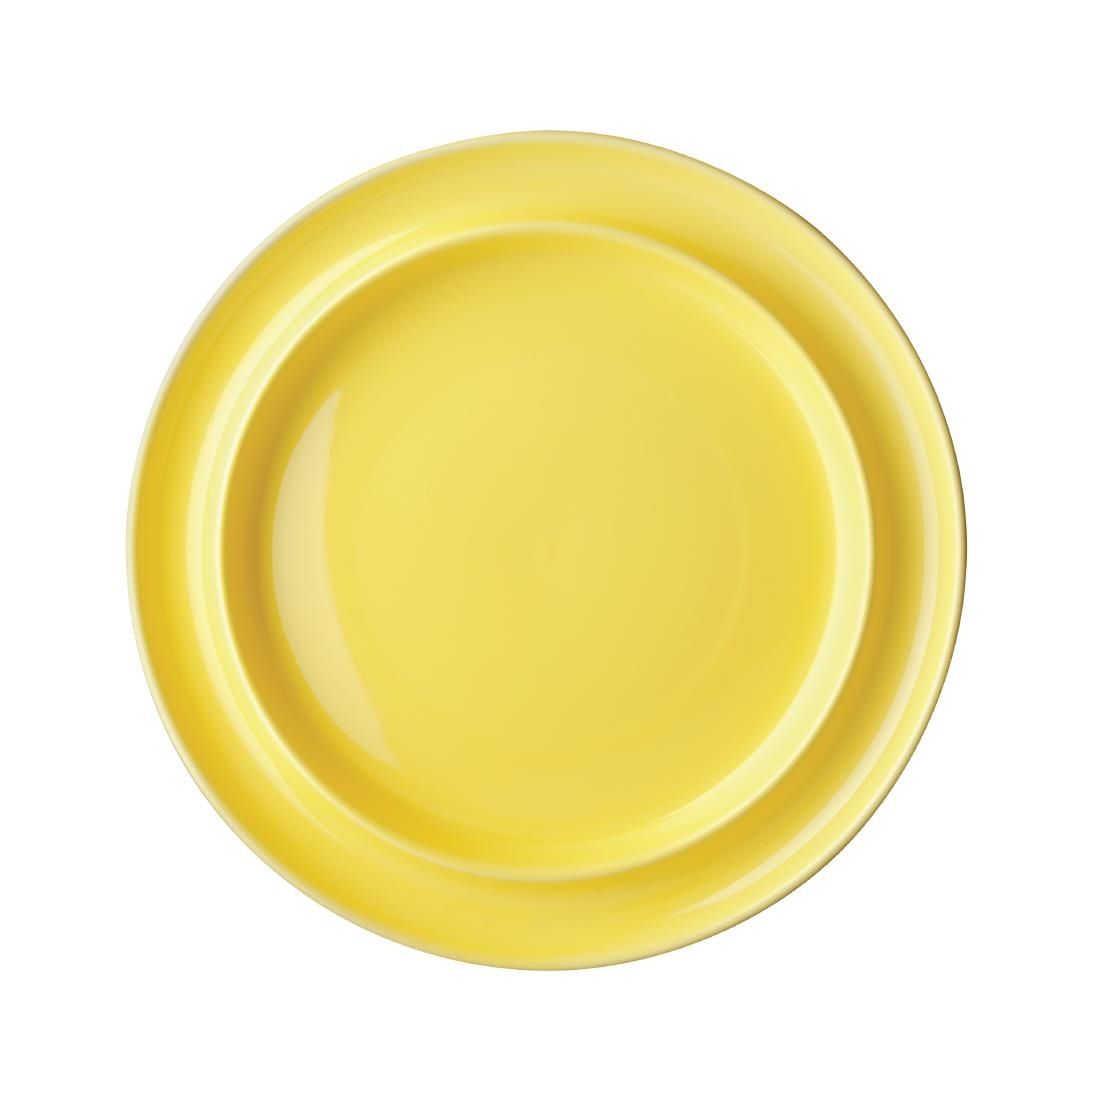 DW147 Olympia Heritage Raised Rim Plates Yellow 253mm (Pack of 4)